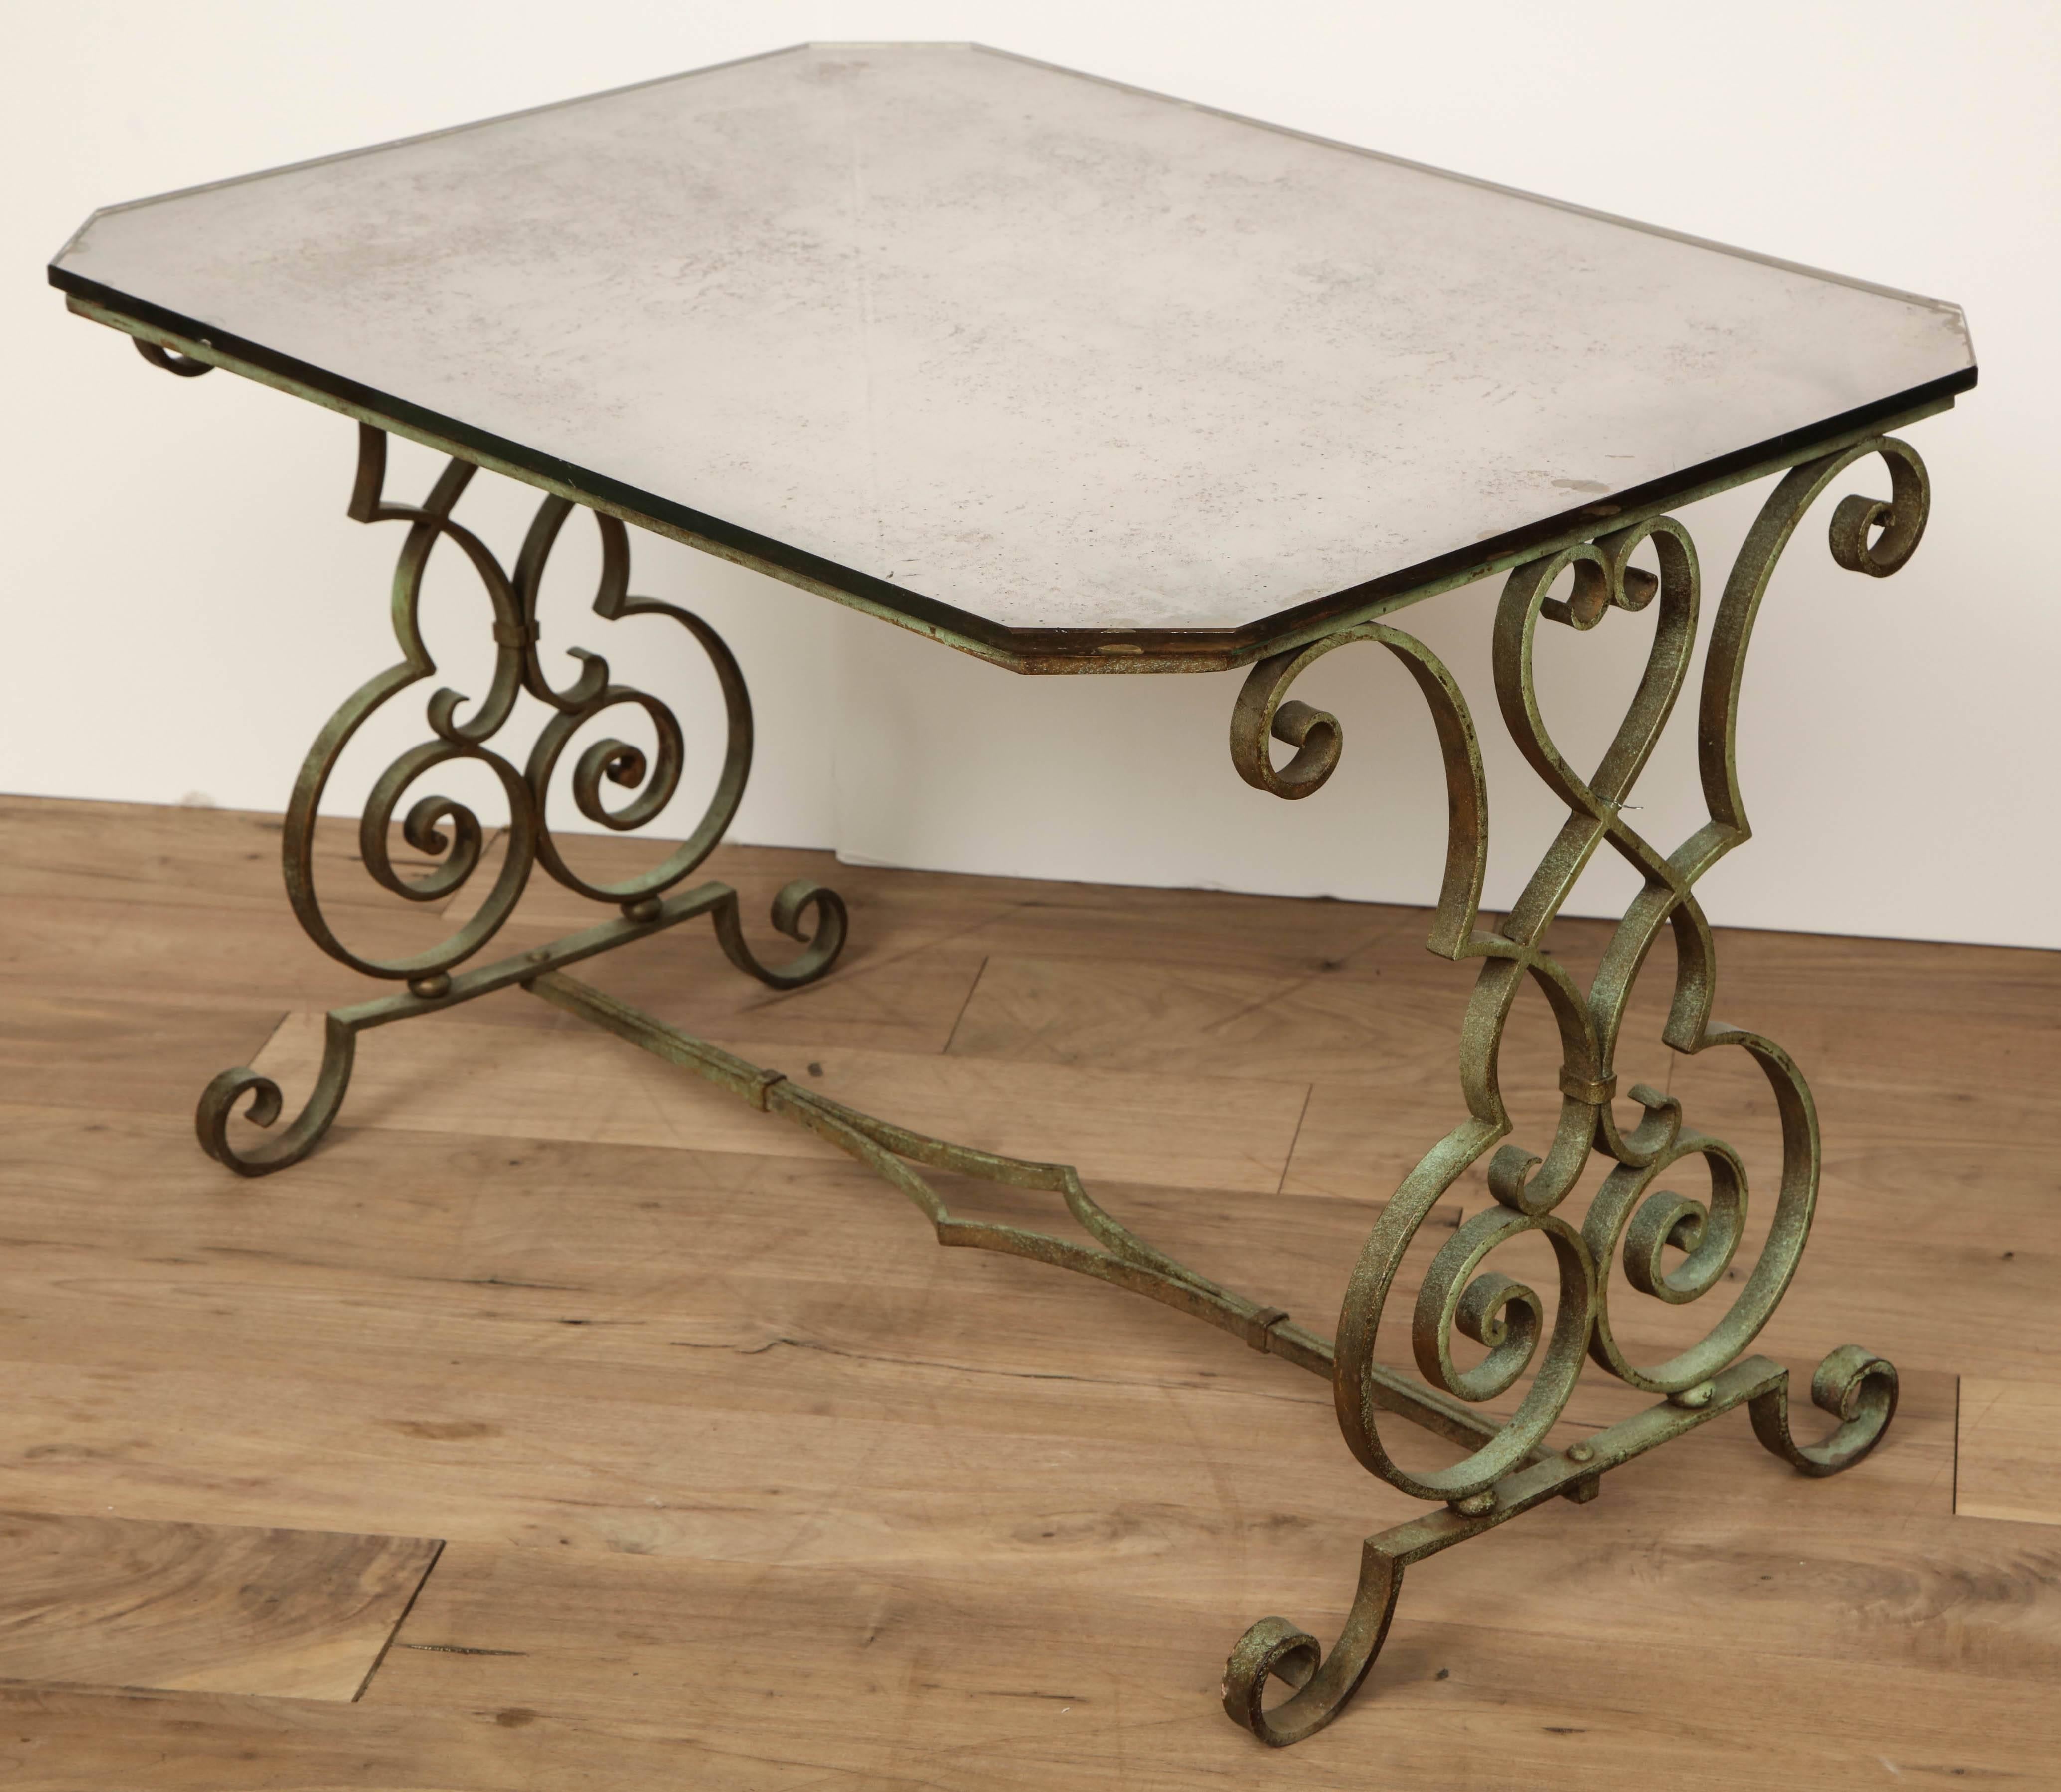 Iron side table with verdigris and antique mirror top, circa 1950.